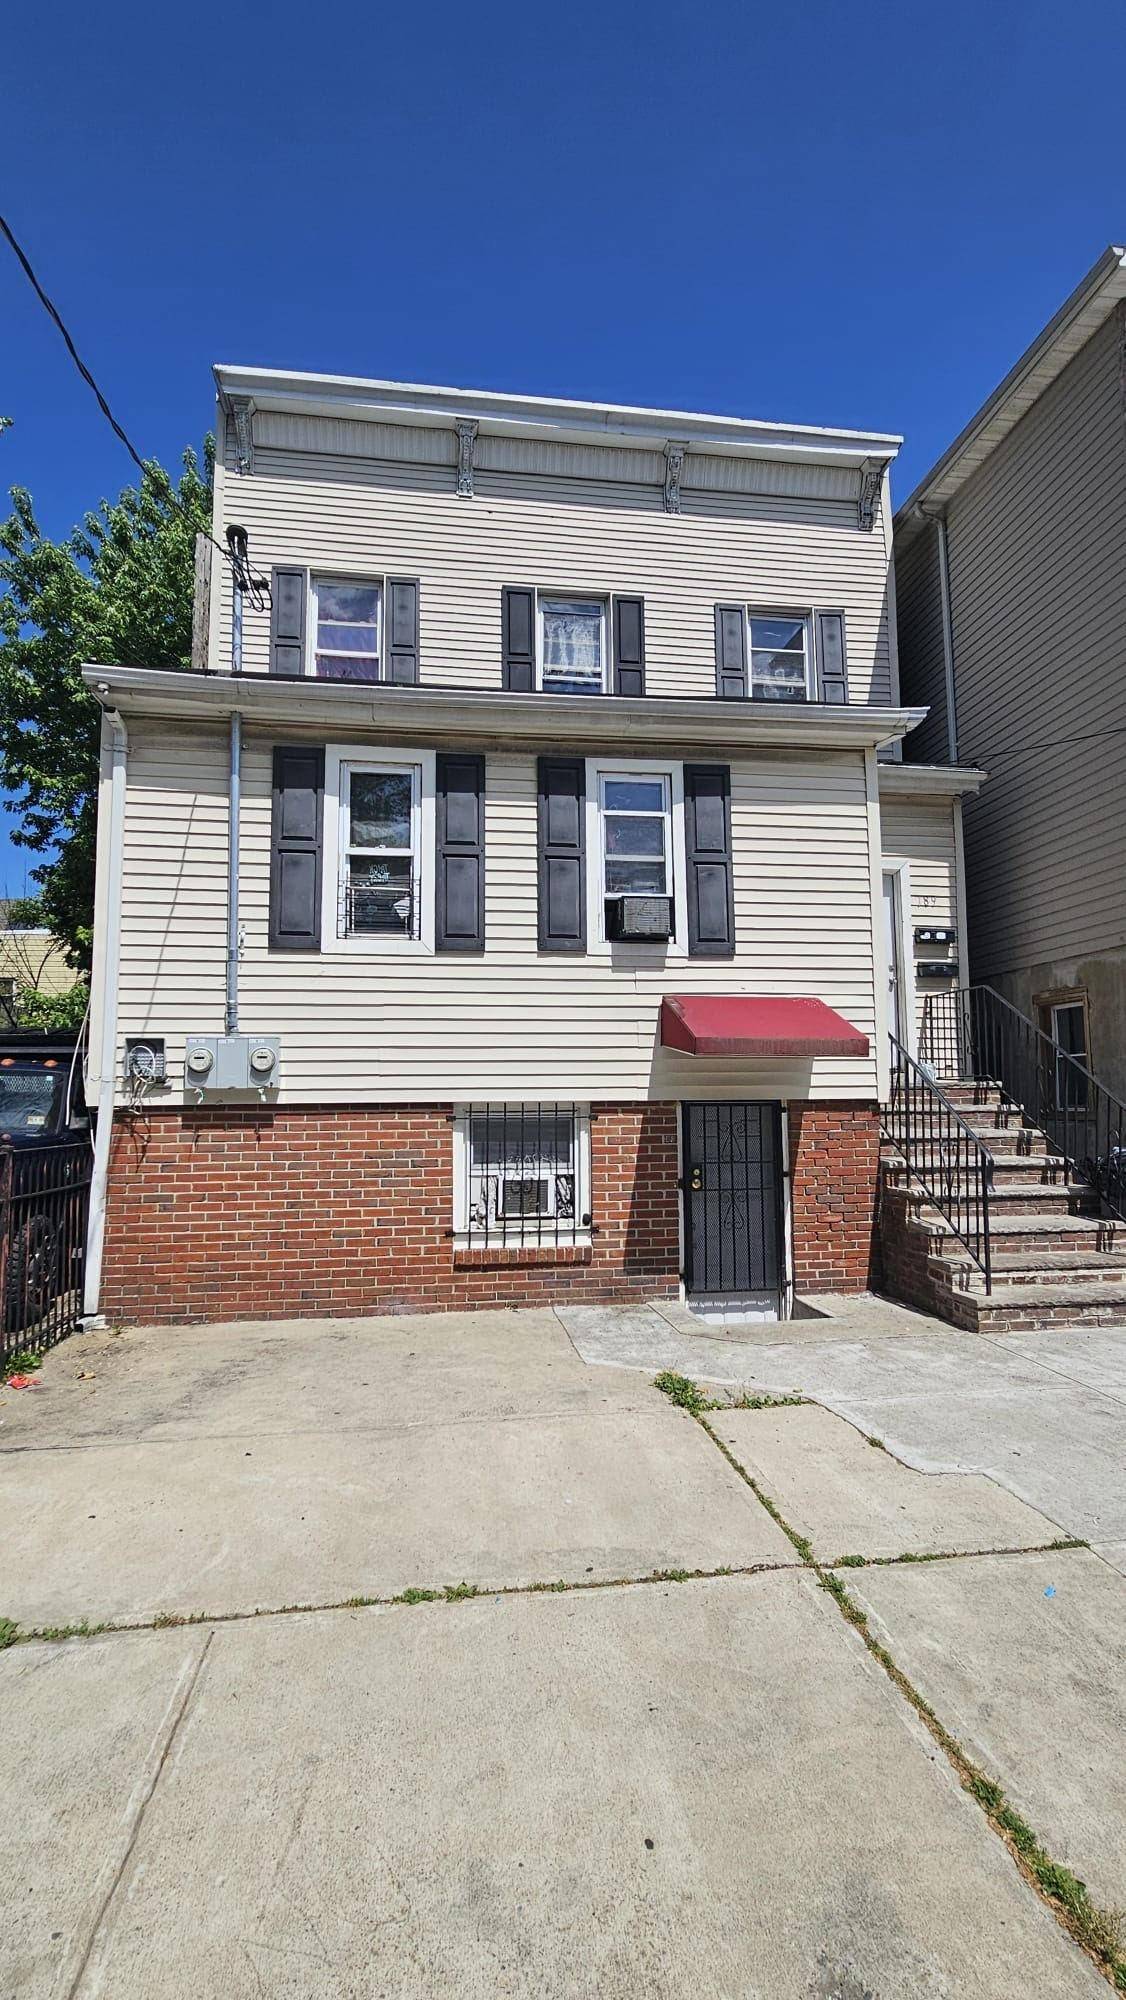 189 ROSE AVE Multi-Family New Jersey